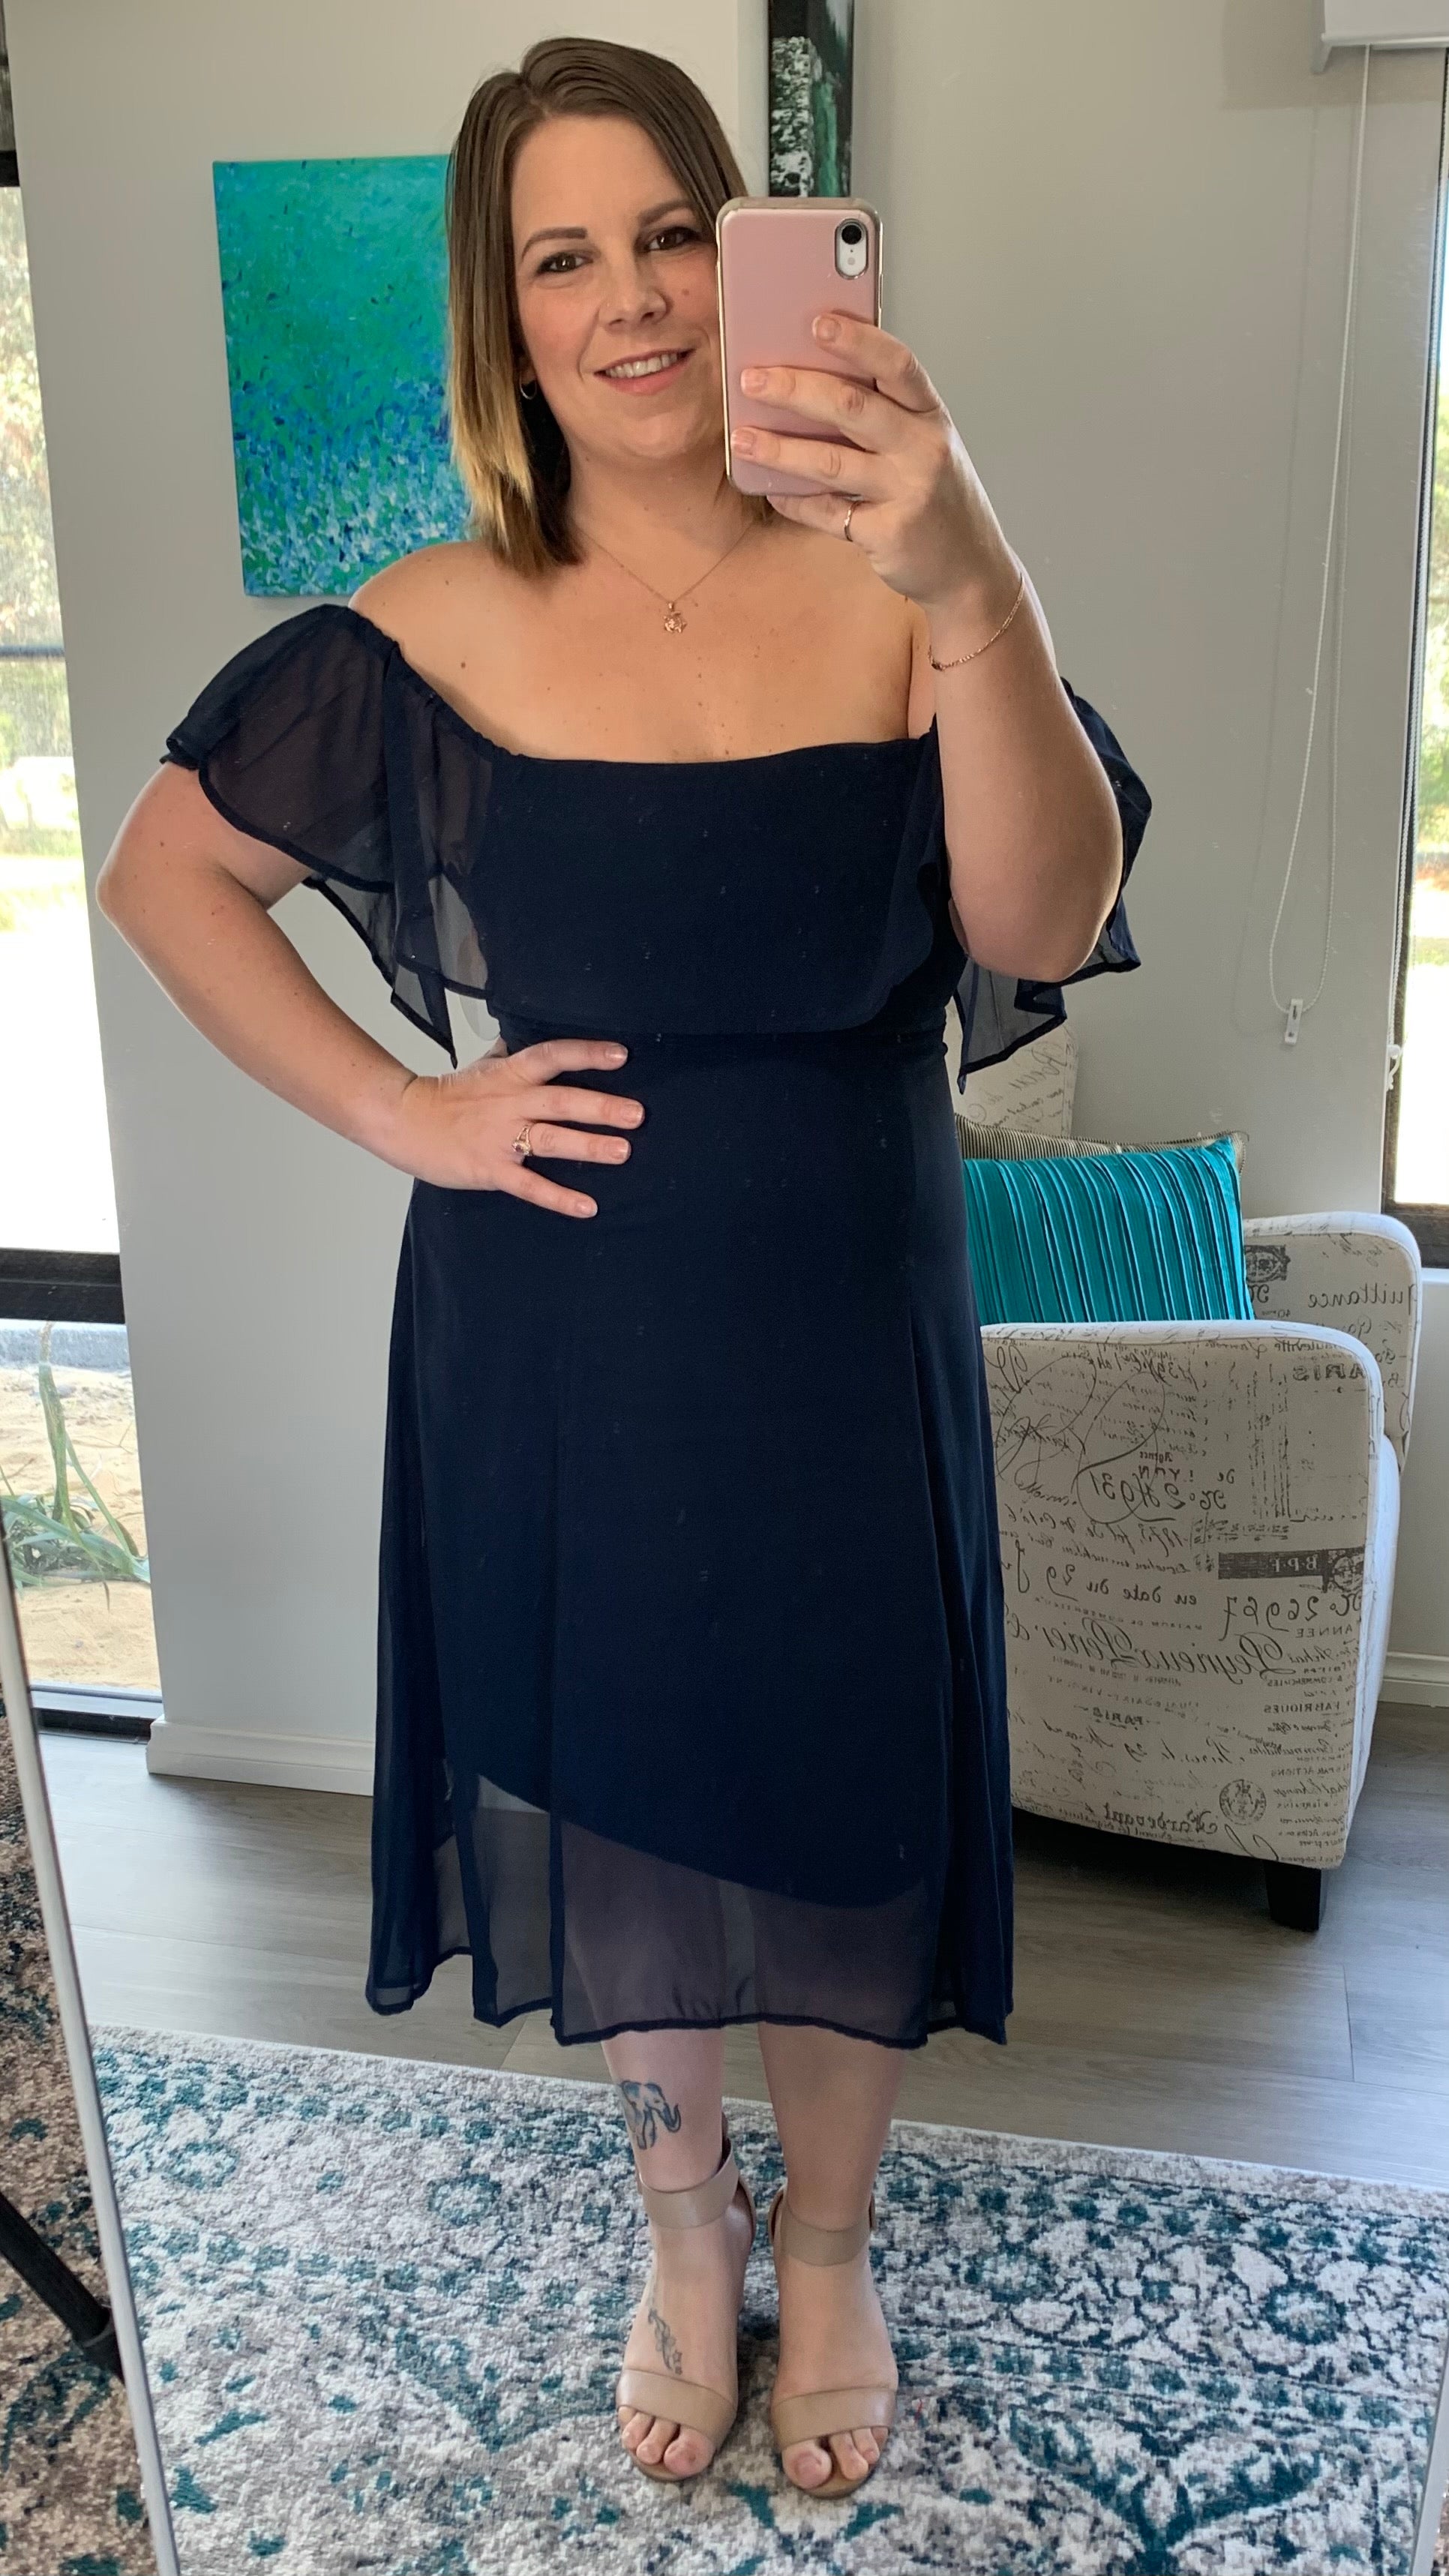 Kendall Off Shoulder Dress - Navy: 
Fitted bodice and off the shoulder ruffle
Zip up back
True to size
Danika is wearing a size 12

Also available in NAVY FLORAL - Ciao Bella Dresses - Teaberry